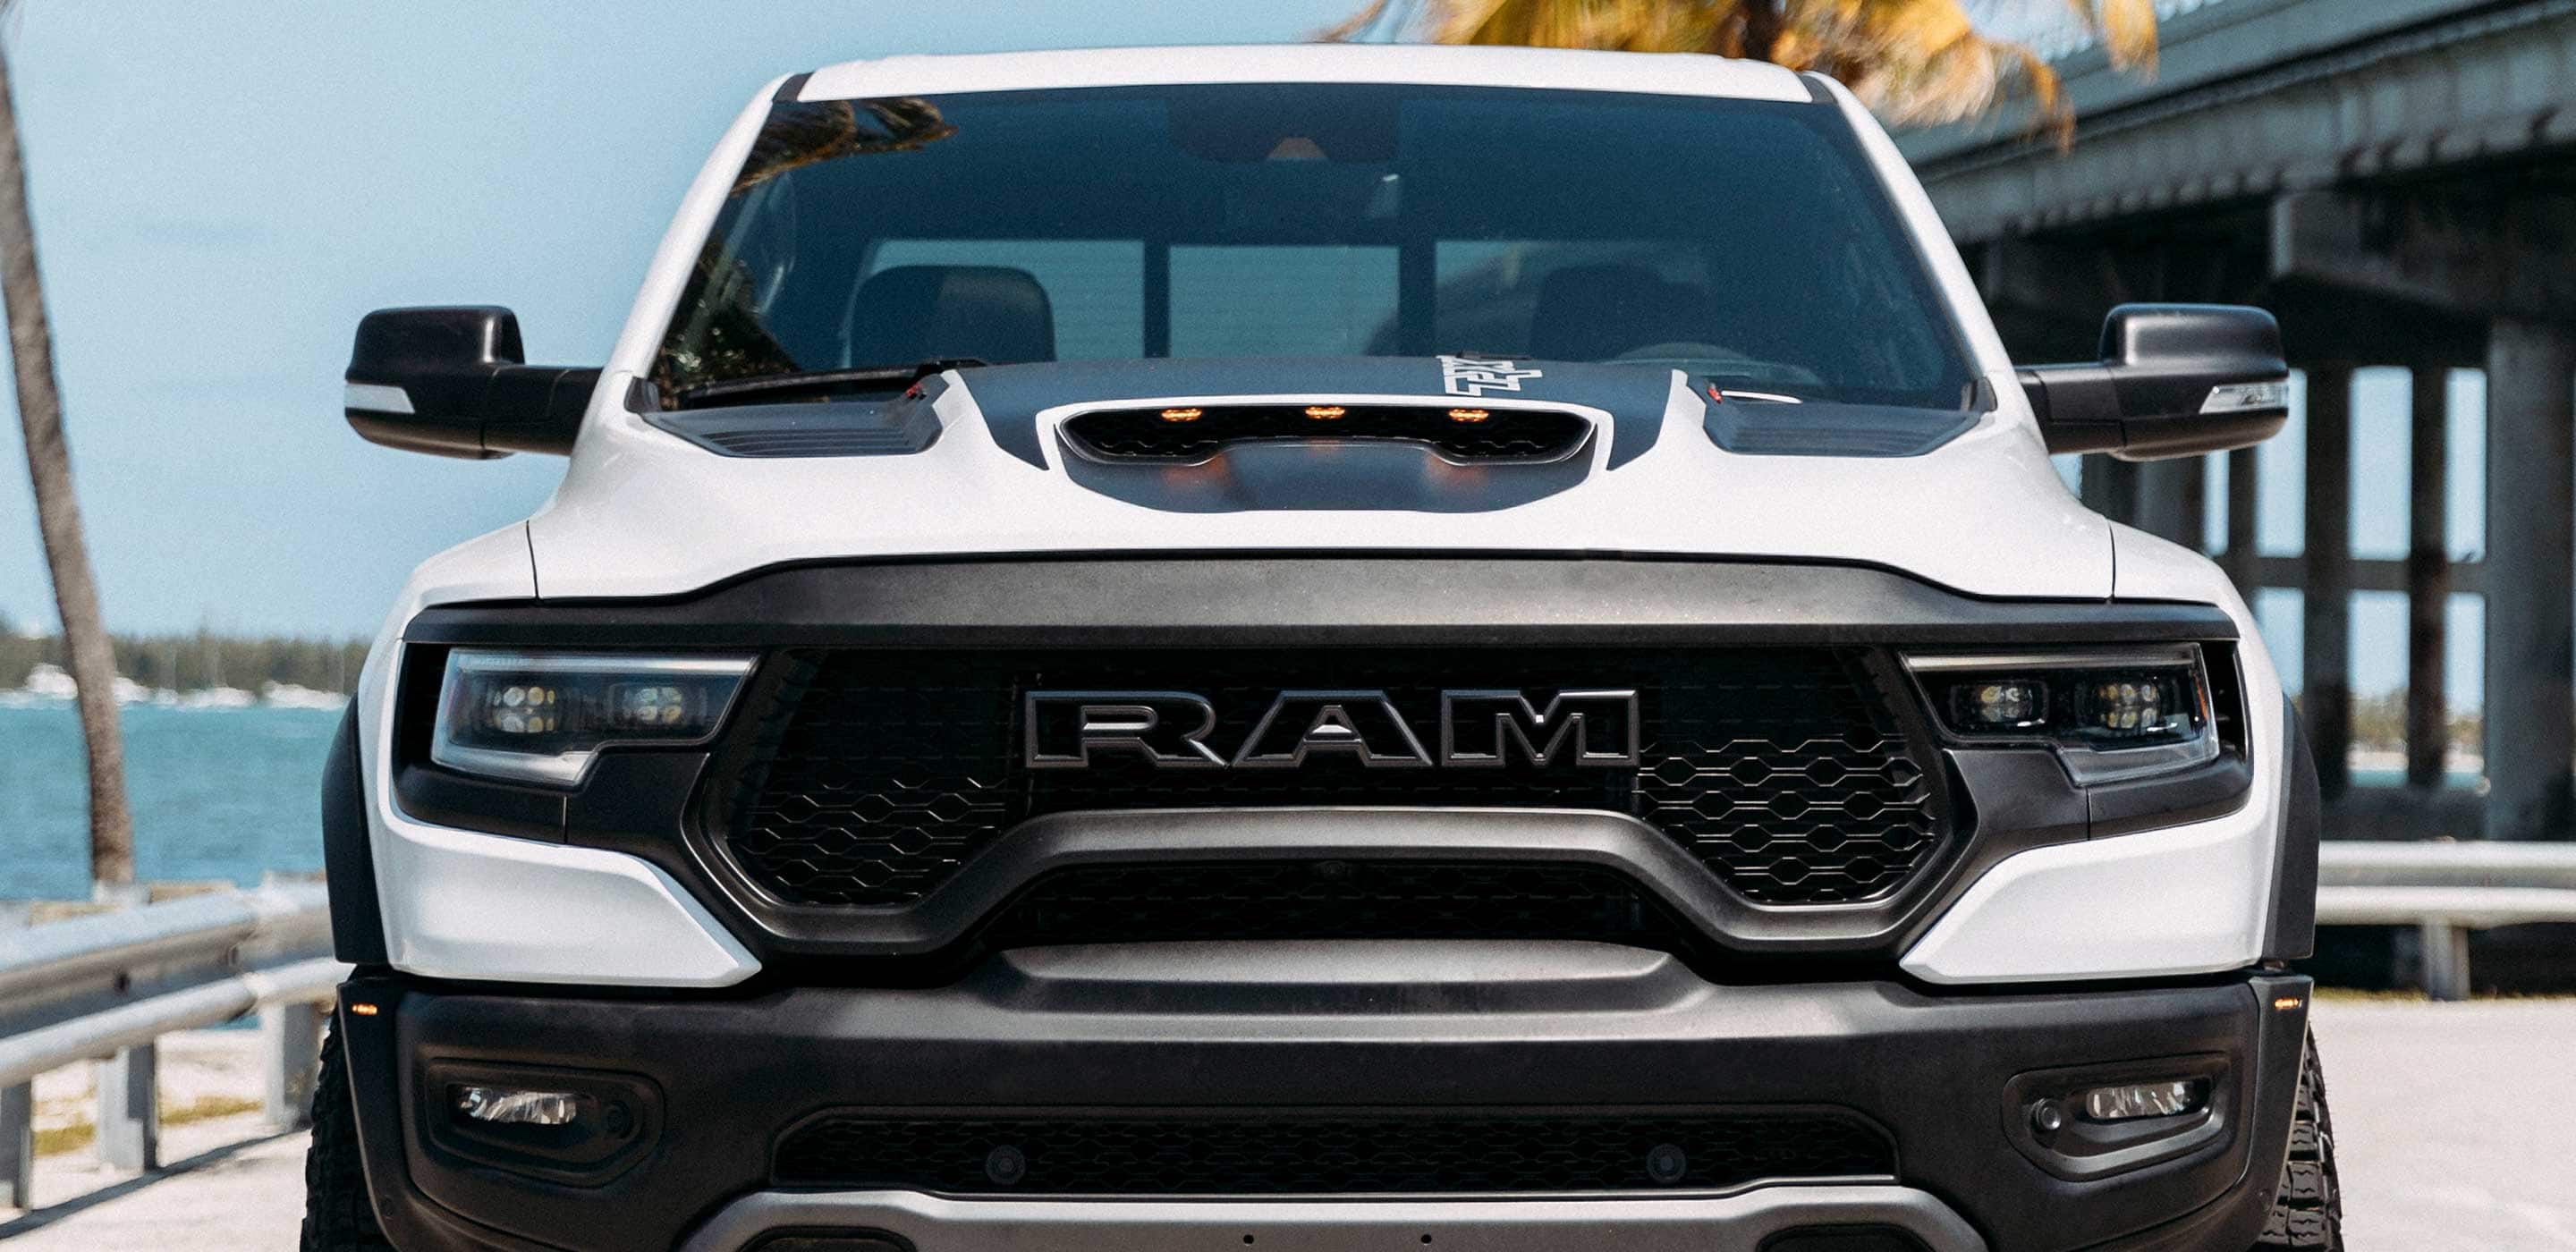 Images of the Ram 1500 TRX